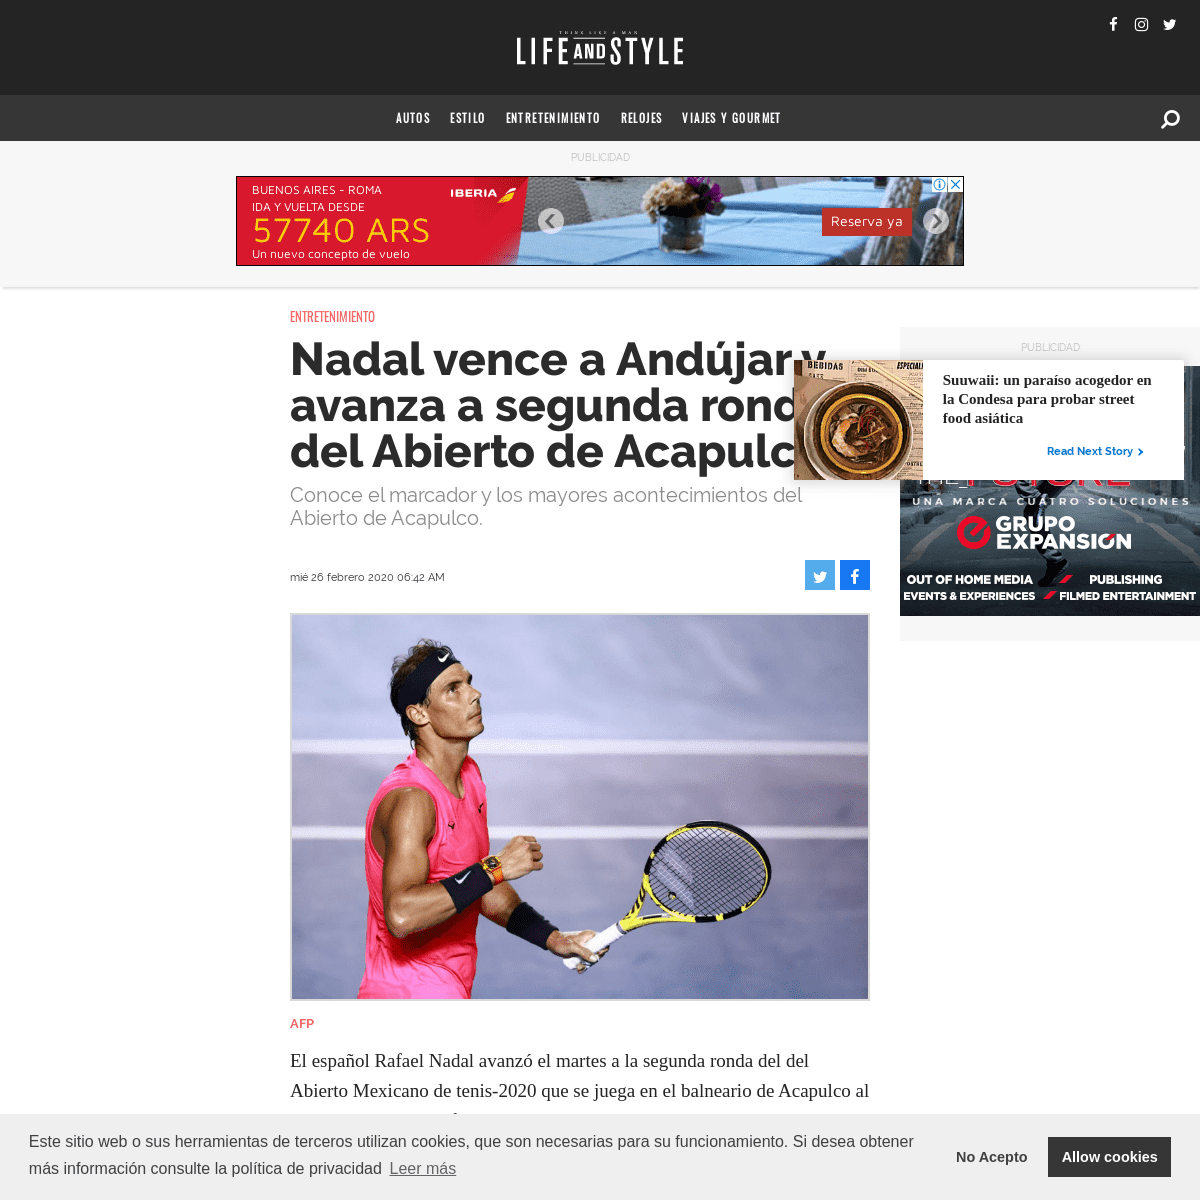 A complete backup of lifeandstyle.mx/entretenimiento/2020/02/26/nadal-vence-a-andujar-abierto-de-acapulco